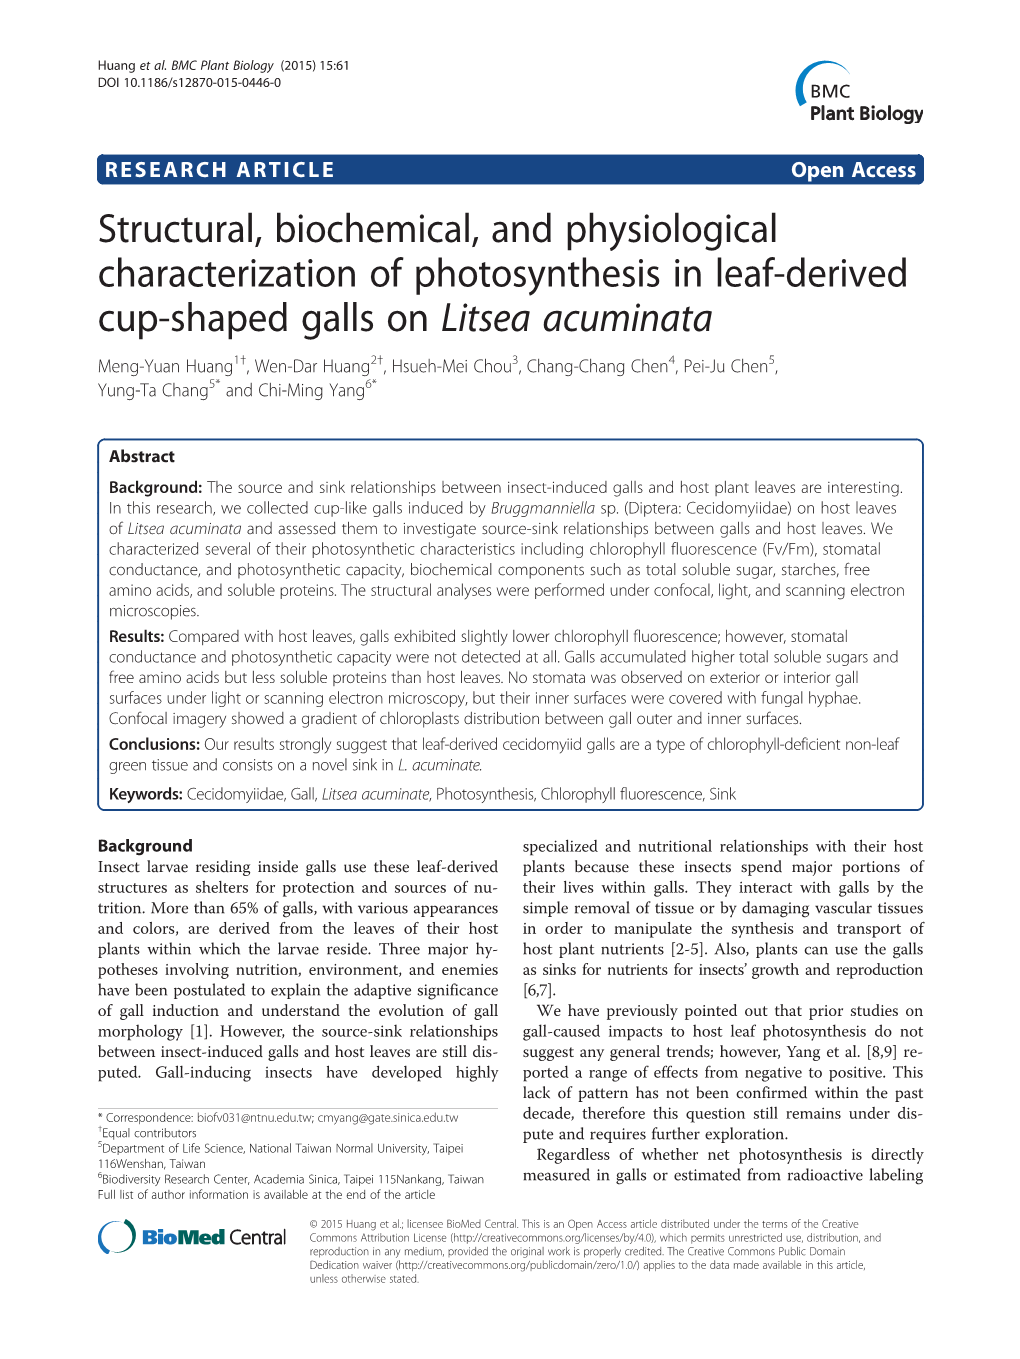 Structural, Biochemical, and Physiological Characterization Of